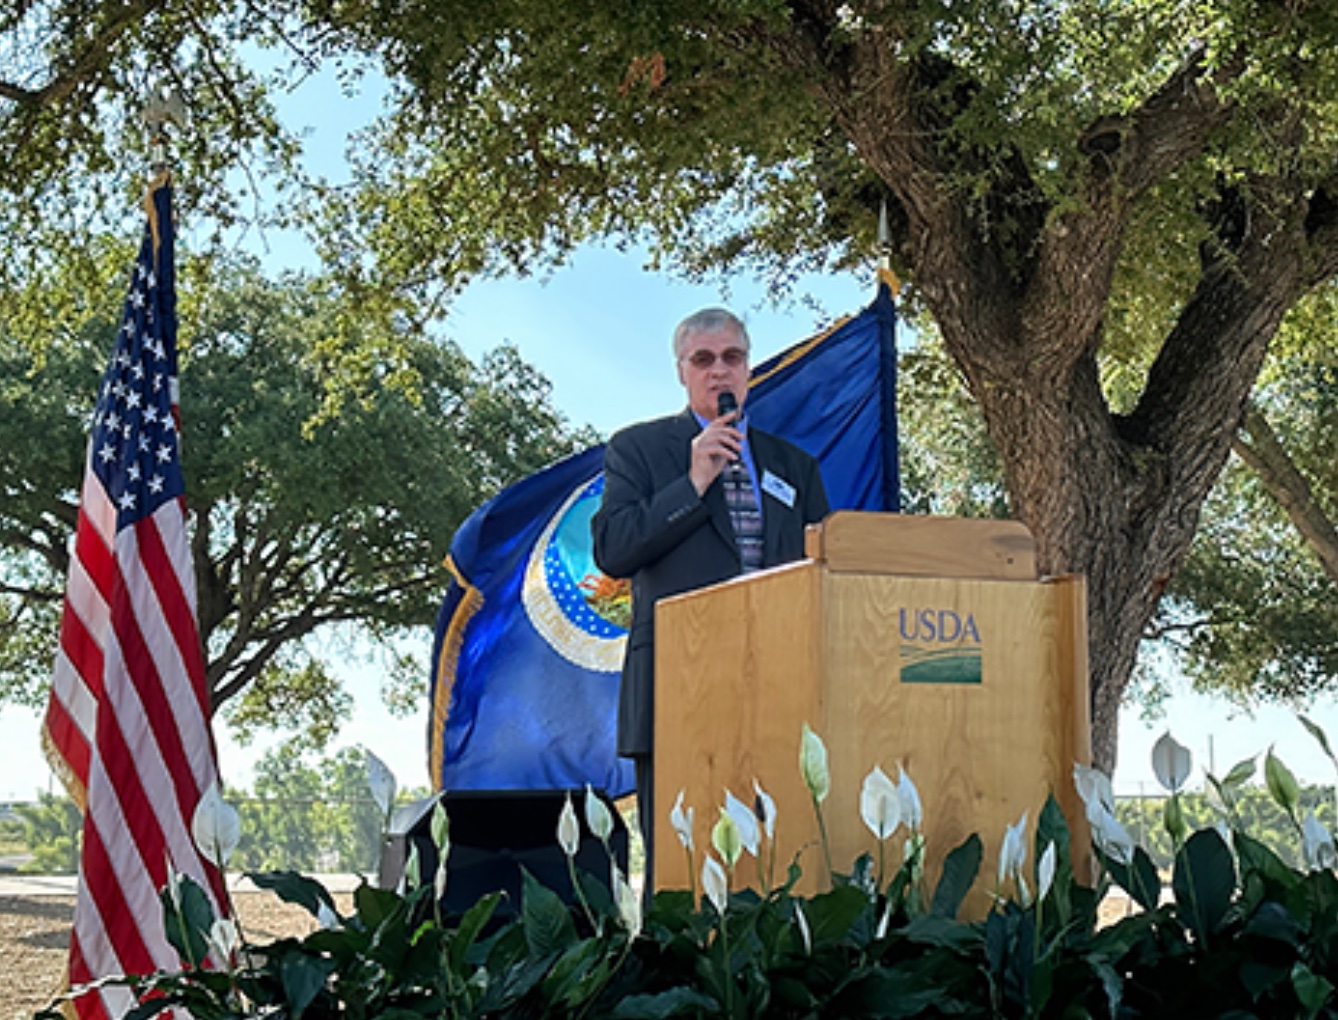 Dr. Steven Kappes, ARS Associate Administrator, kicks off USDA-ARS ribbon cutting ceremony for the newly-renovated ARS Grassland, Soil & Water Research Laboratory in Temple, Texas. Image courtesy of USDA.